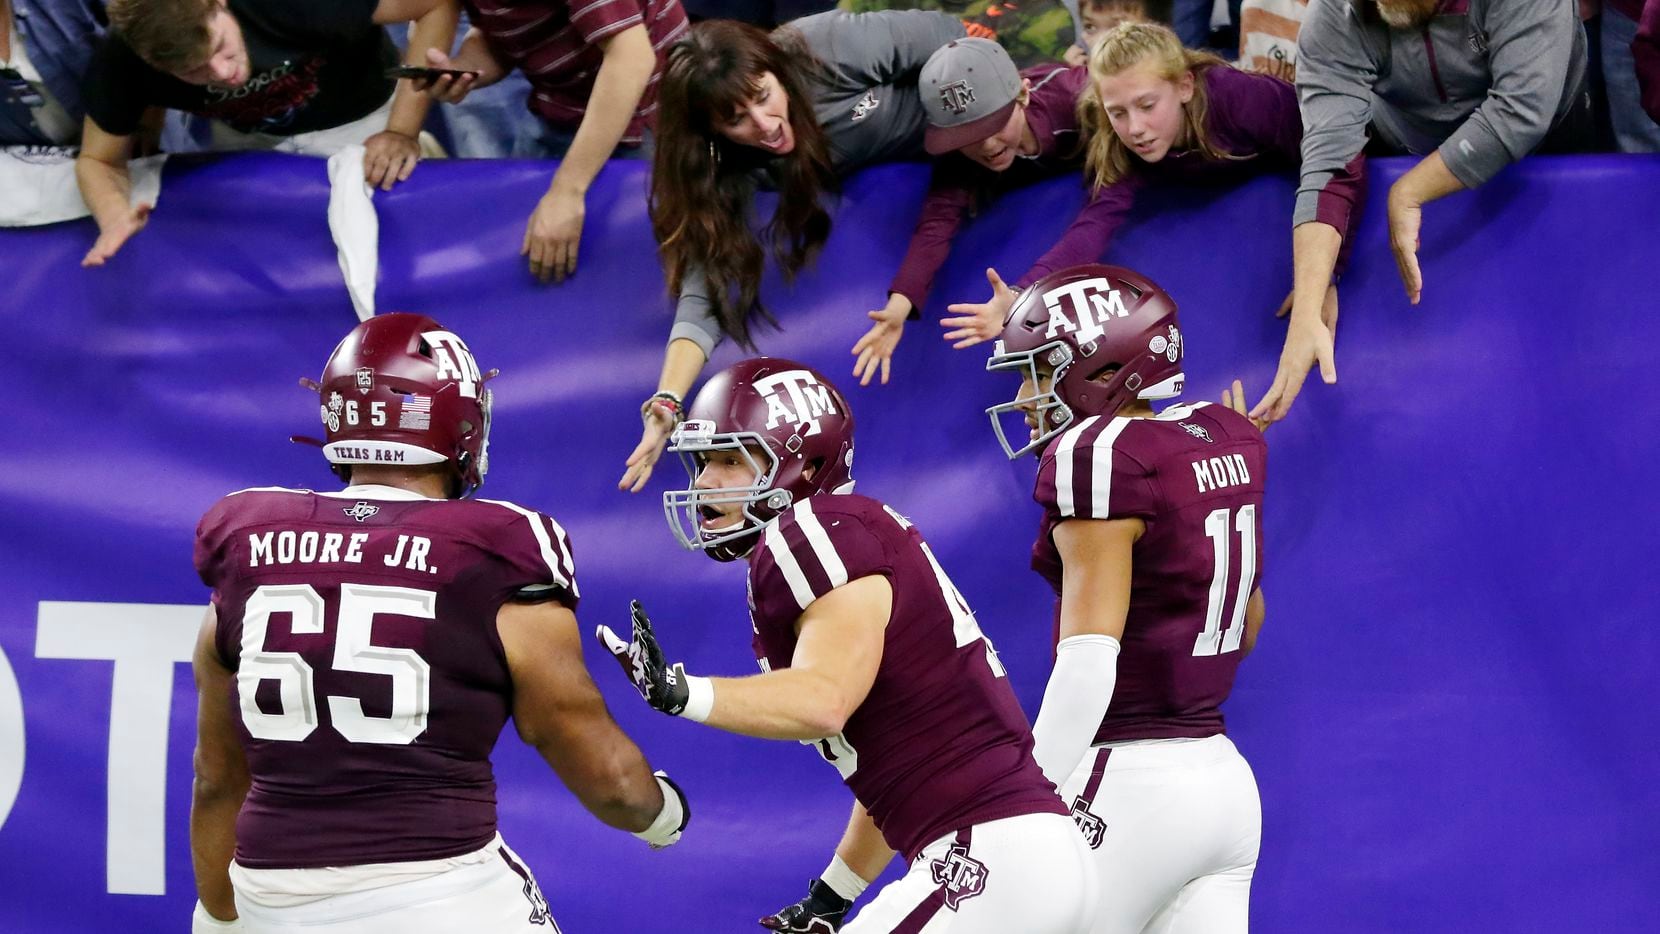 Texas A&M offensive lineman Dan Moore Jr. (65) and tight end Ryan Renick, middle, celebrate as quarterback Kellen Mond (11) high-five fans in the stands after Mond's touchdown during the second half of the Texas Bowl NCAA college football game against Oklahoma State on Friday, Dec. 27, 2019, in Houston.